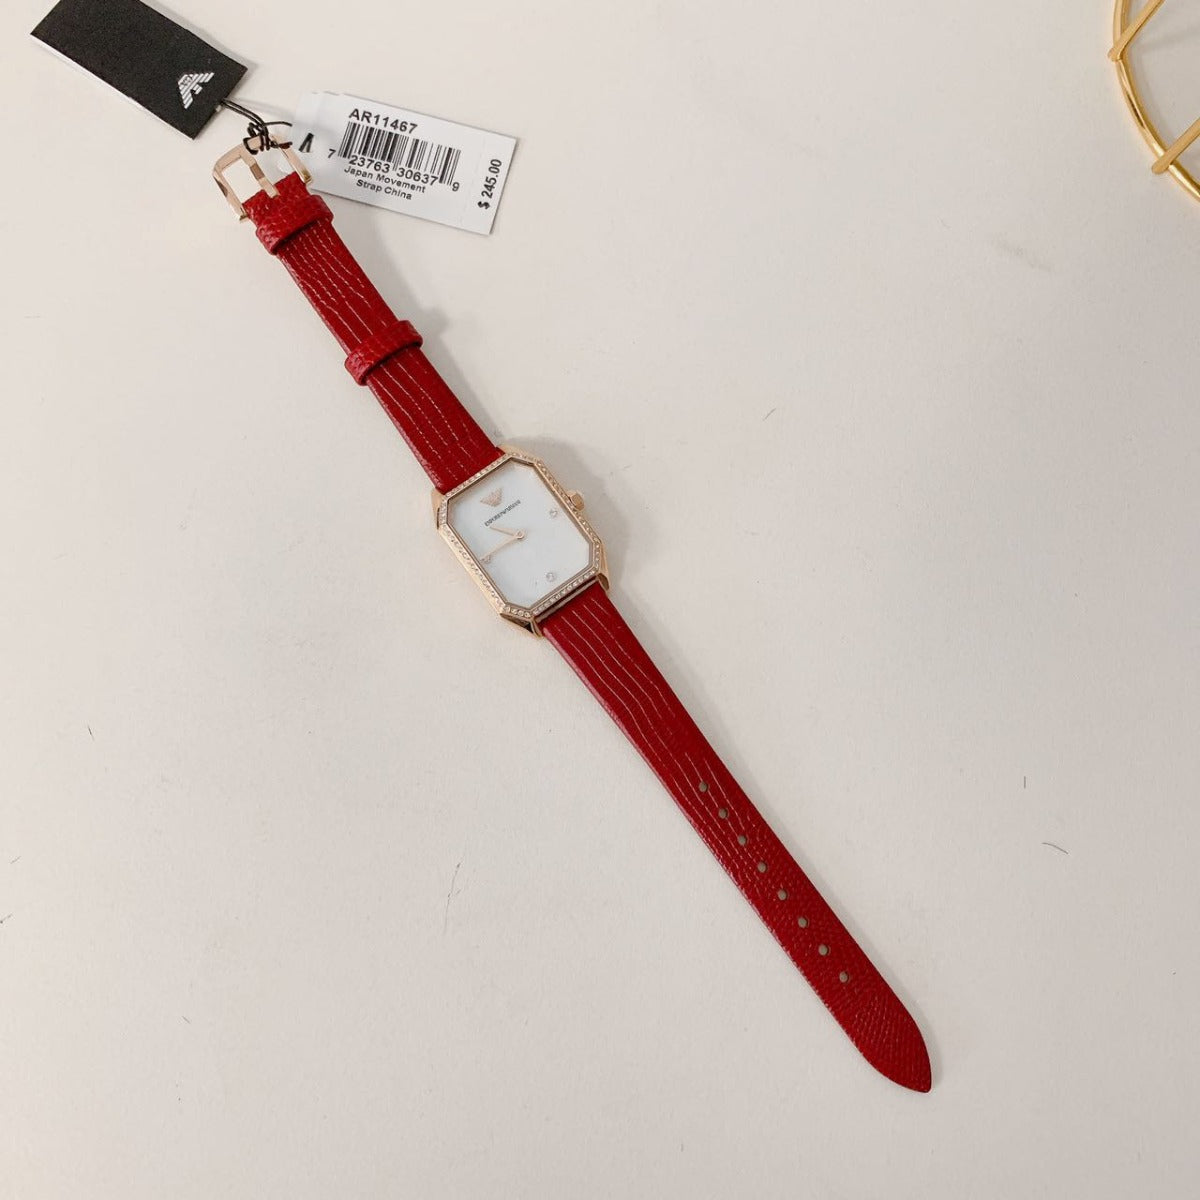 Emporio Armani AR11467 Two-Hand Red Leather Watch 723763306379